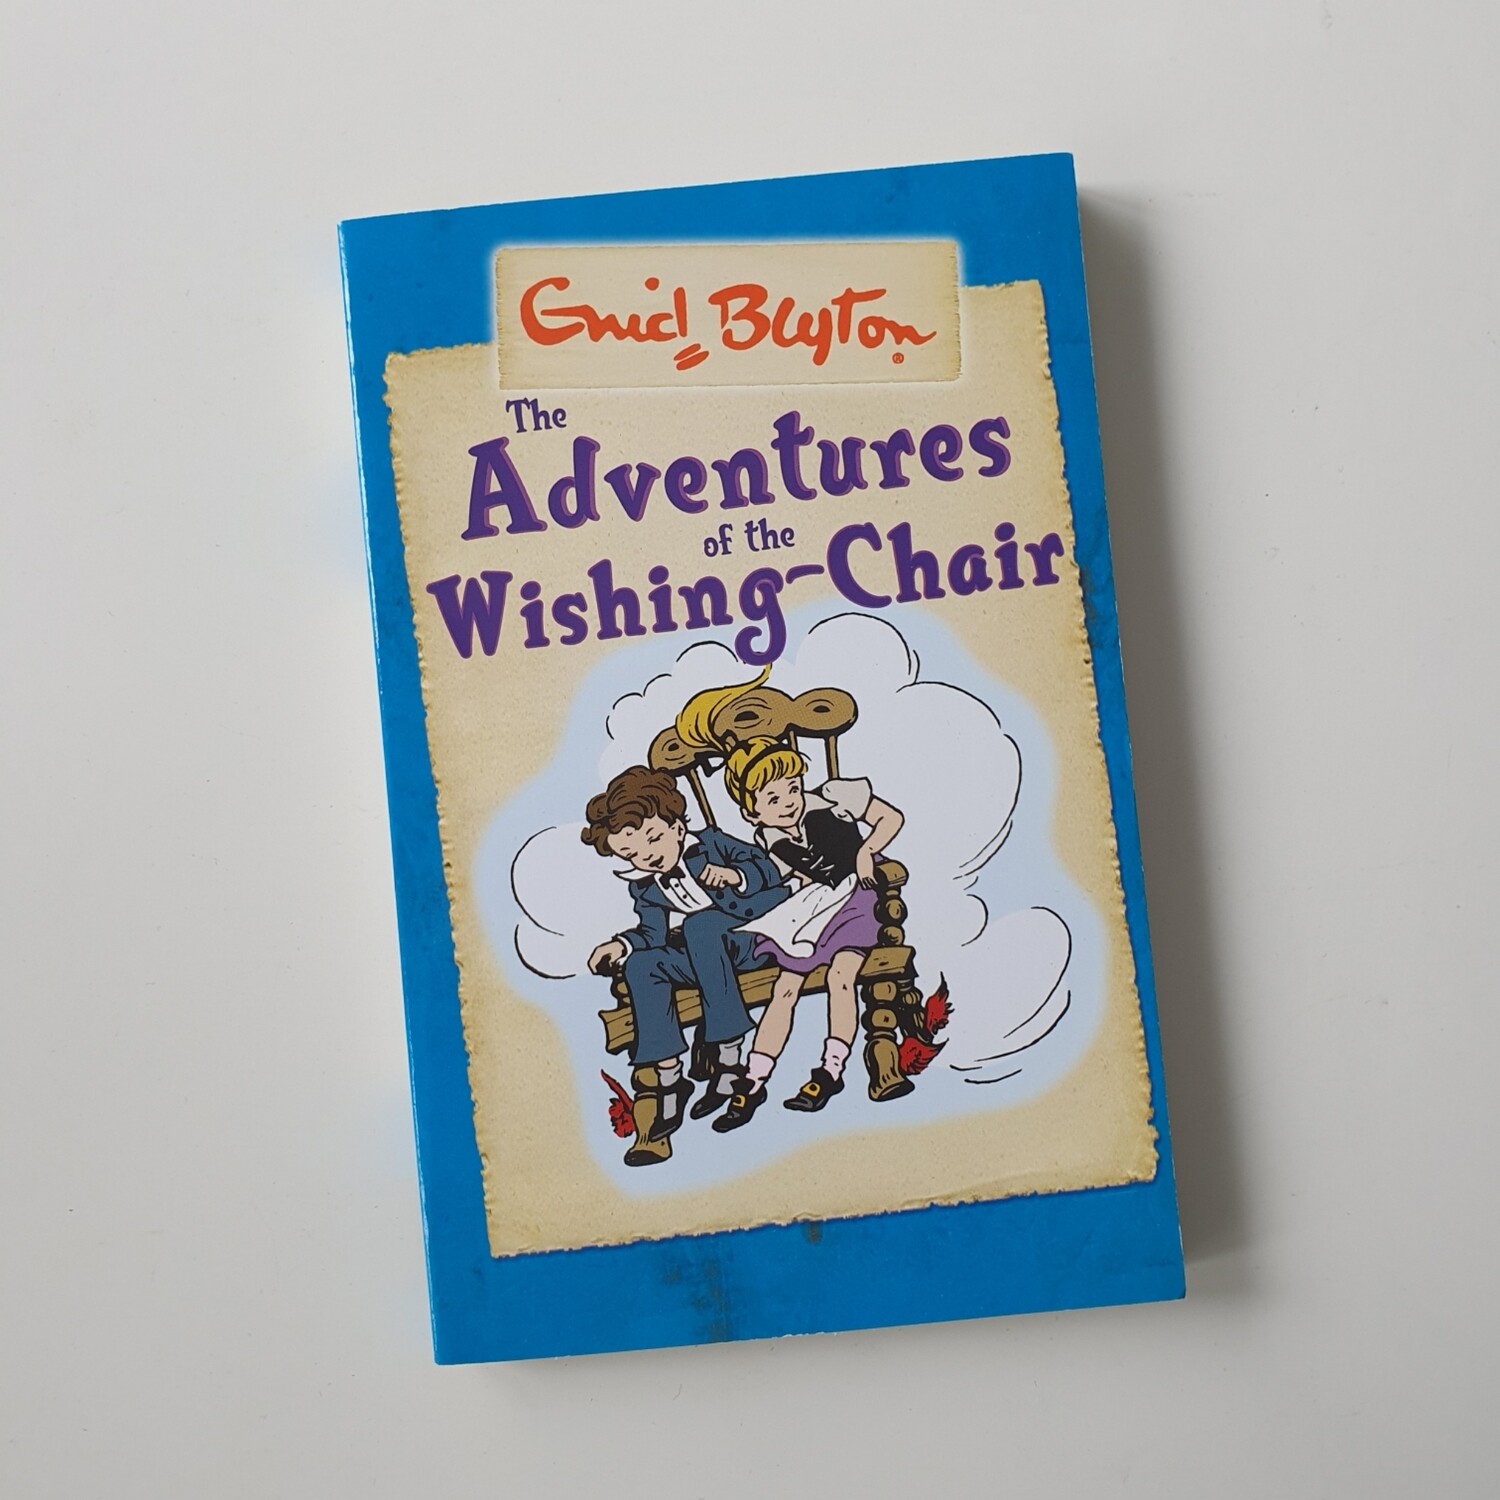 Enid Blyton The Adventures of the Wishing Chair Notebook - made from a paperback book